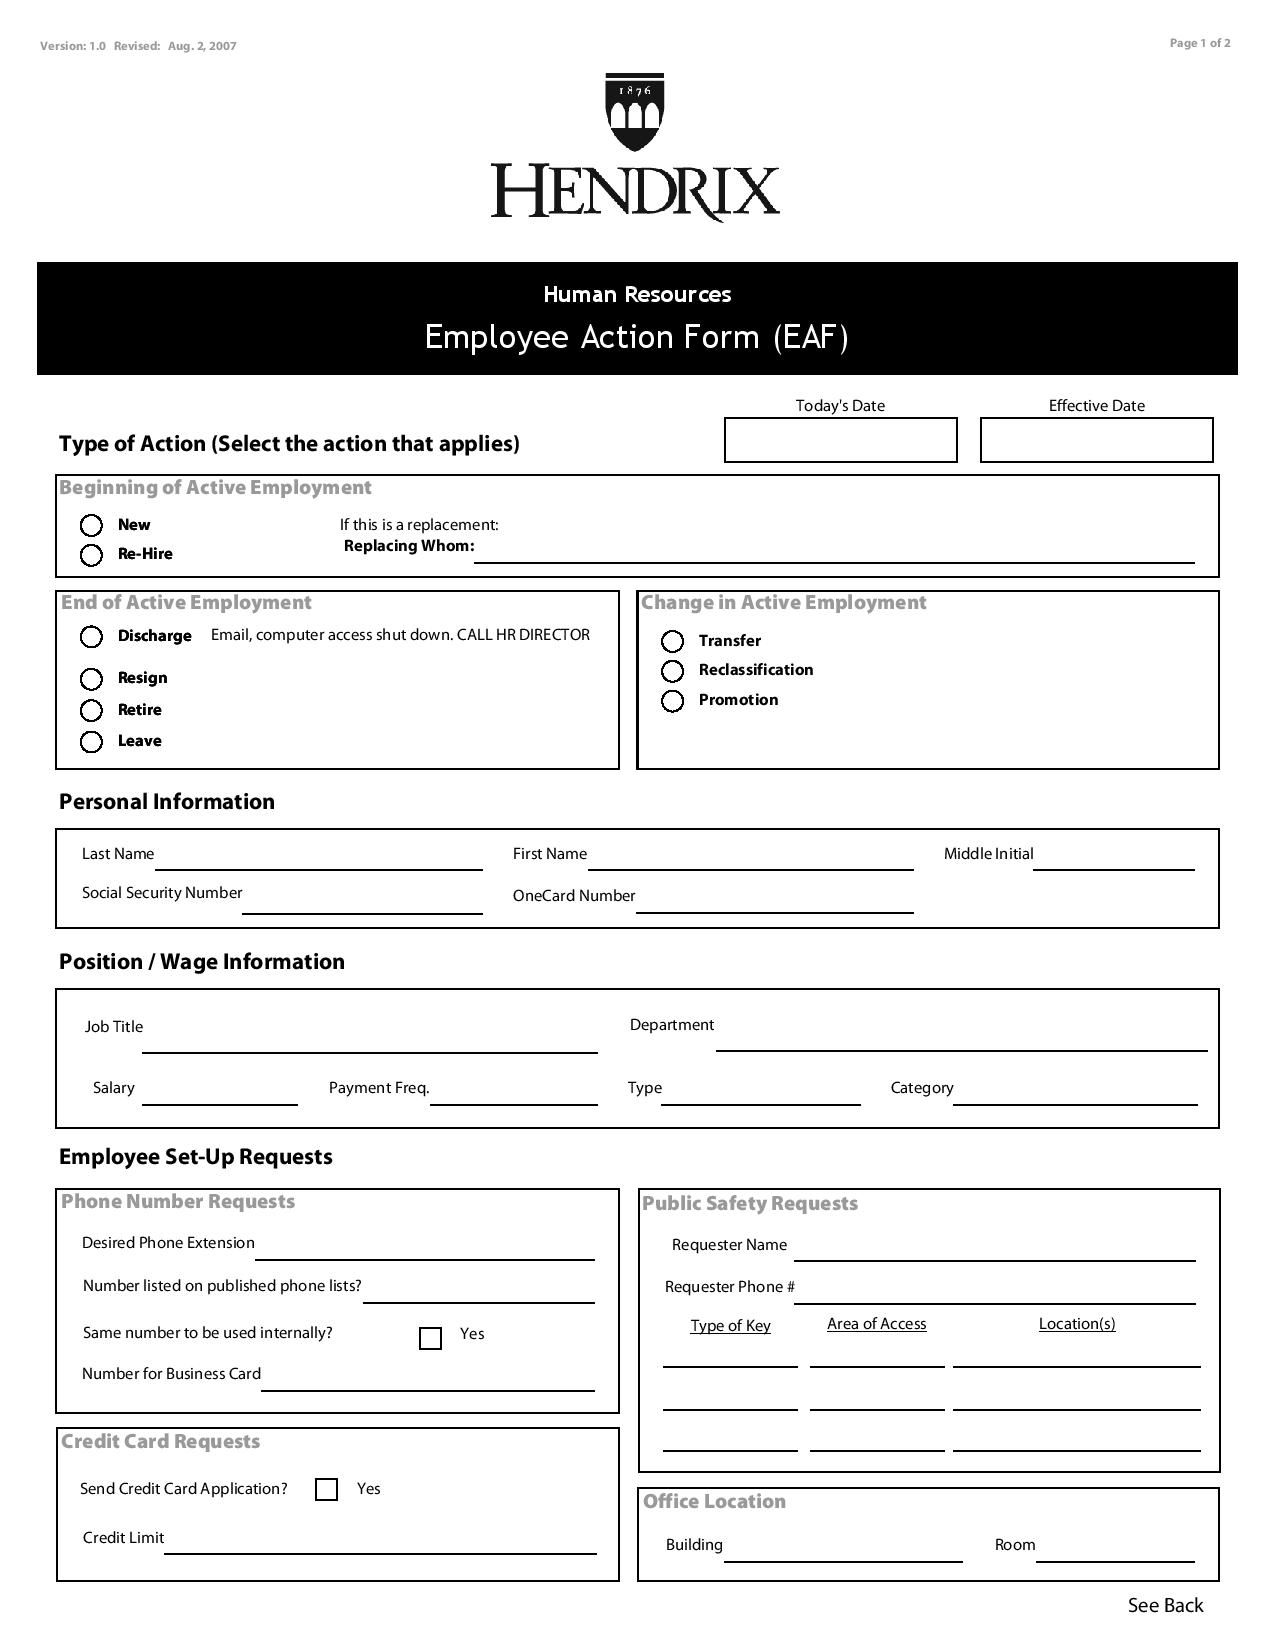 employee action form eaf page 001